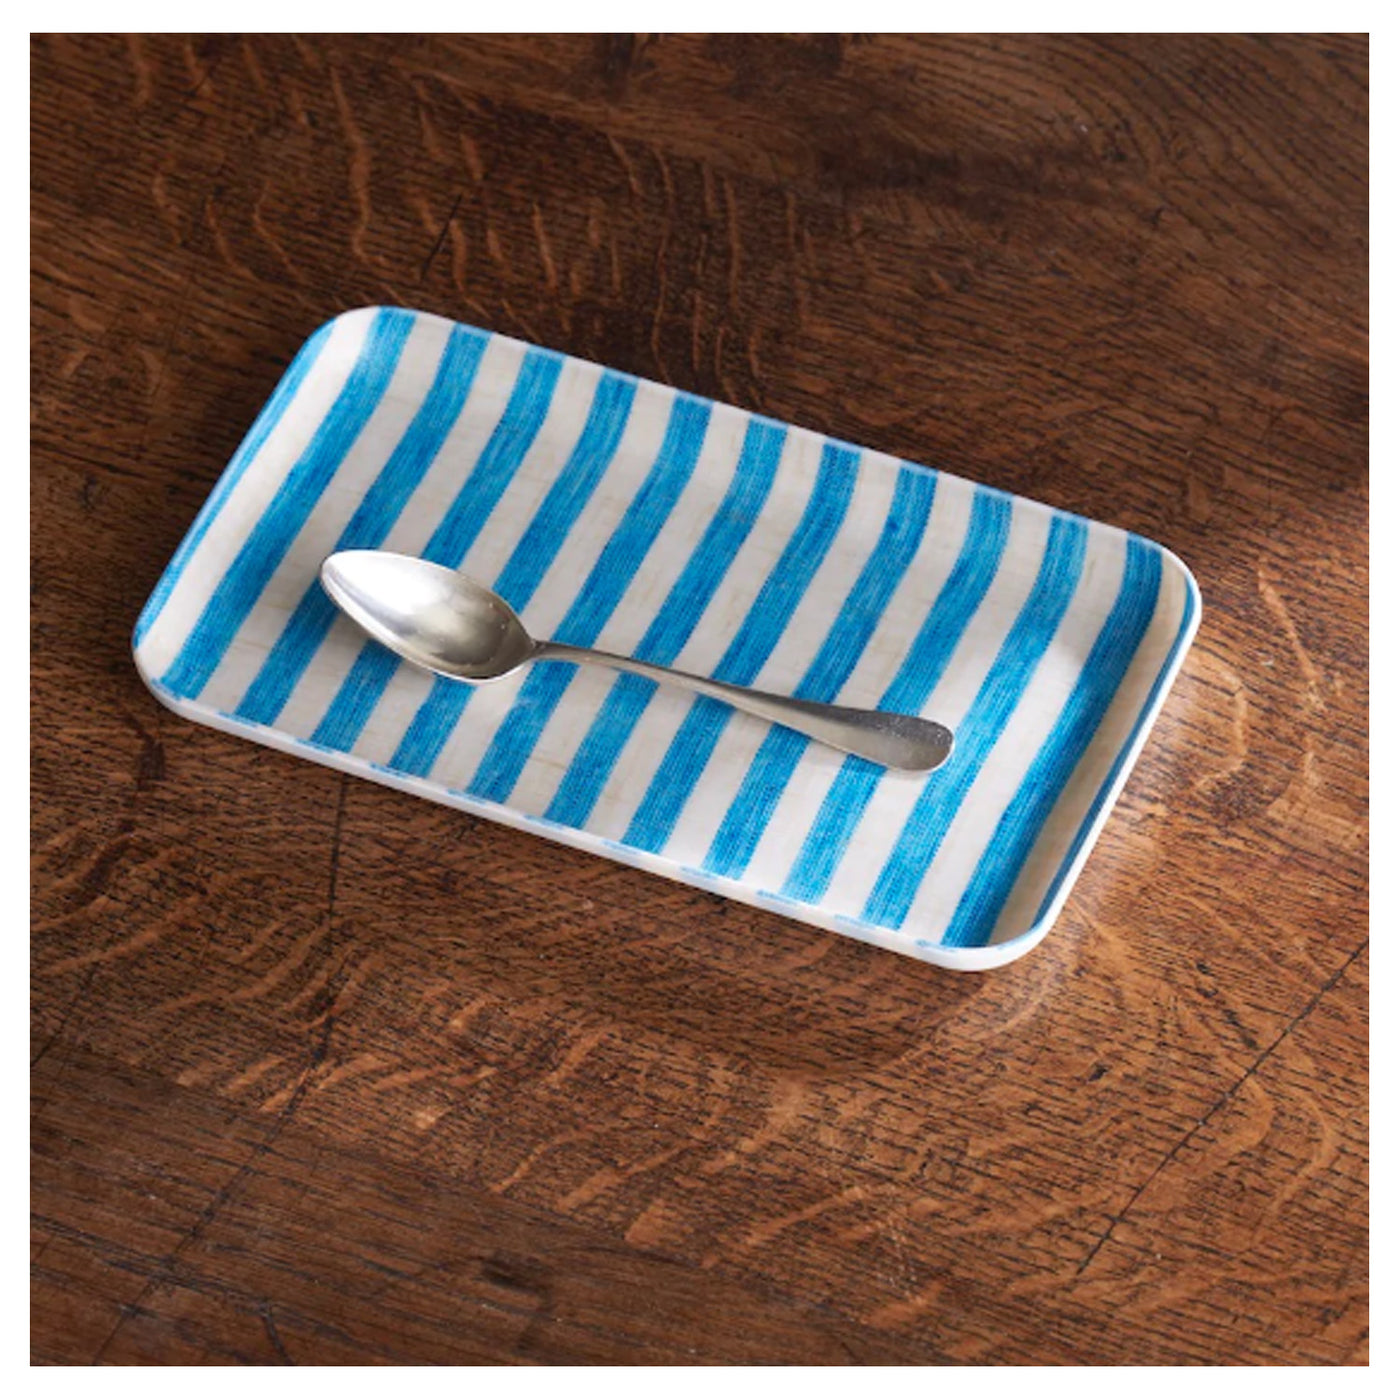 tray with blue and white stripes holding a spoon